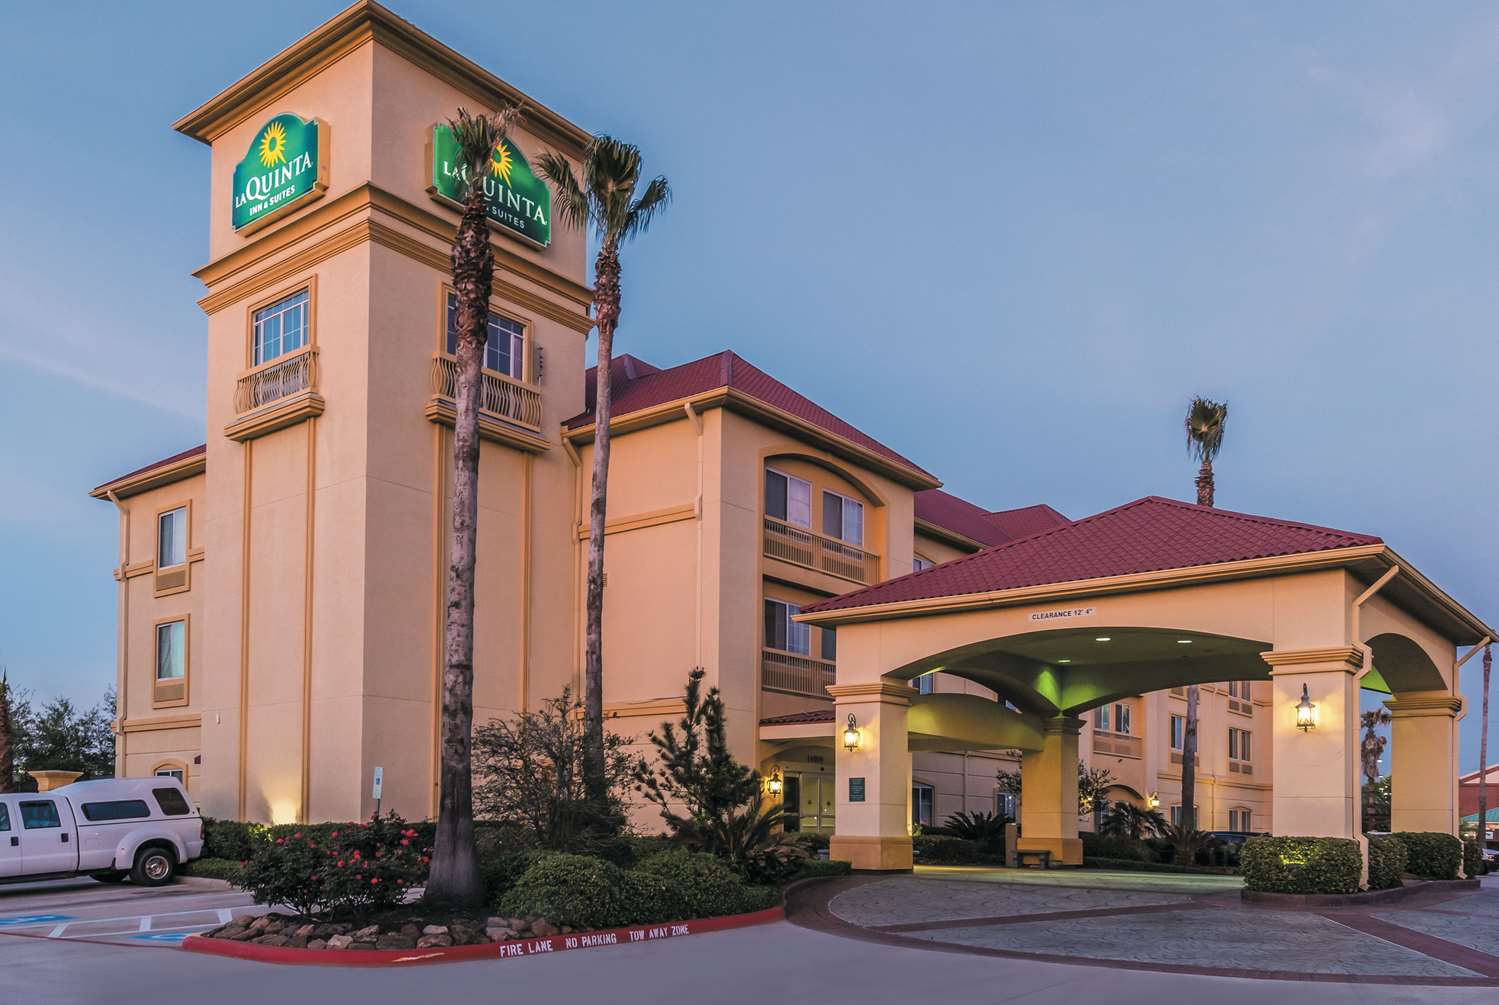 Pet Friendly La Quinta Inn & Suites Tomball in Tomball, Texas